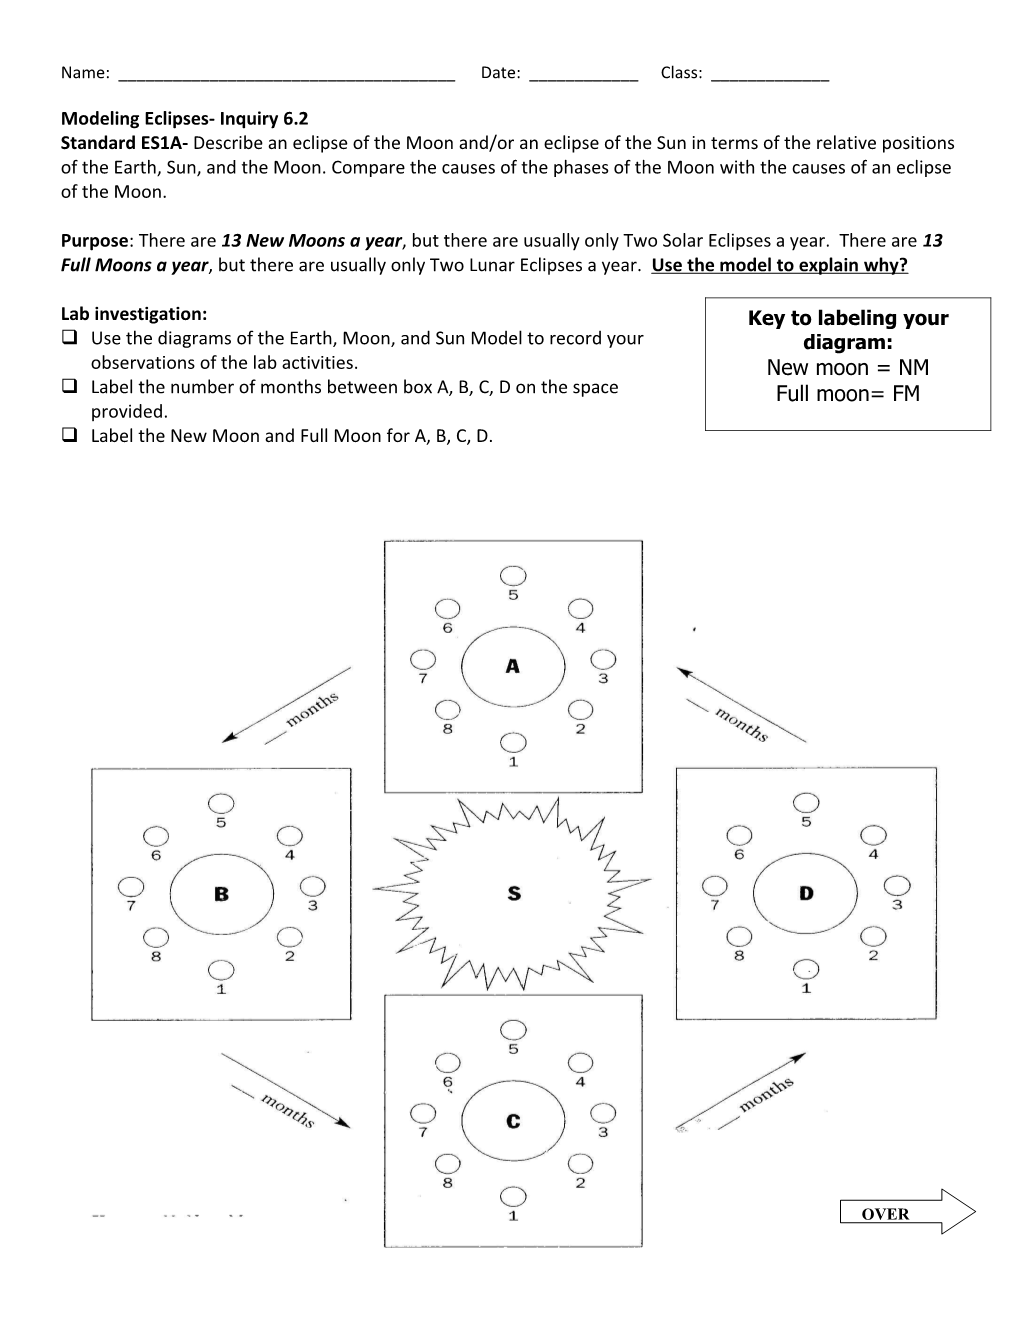 Modeling Eclipses: Student Sheet